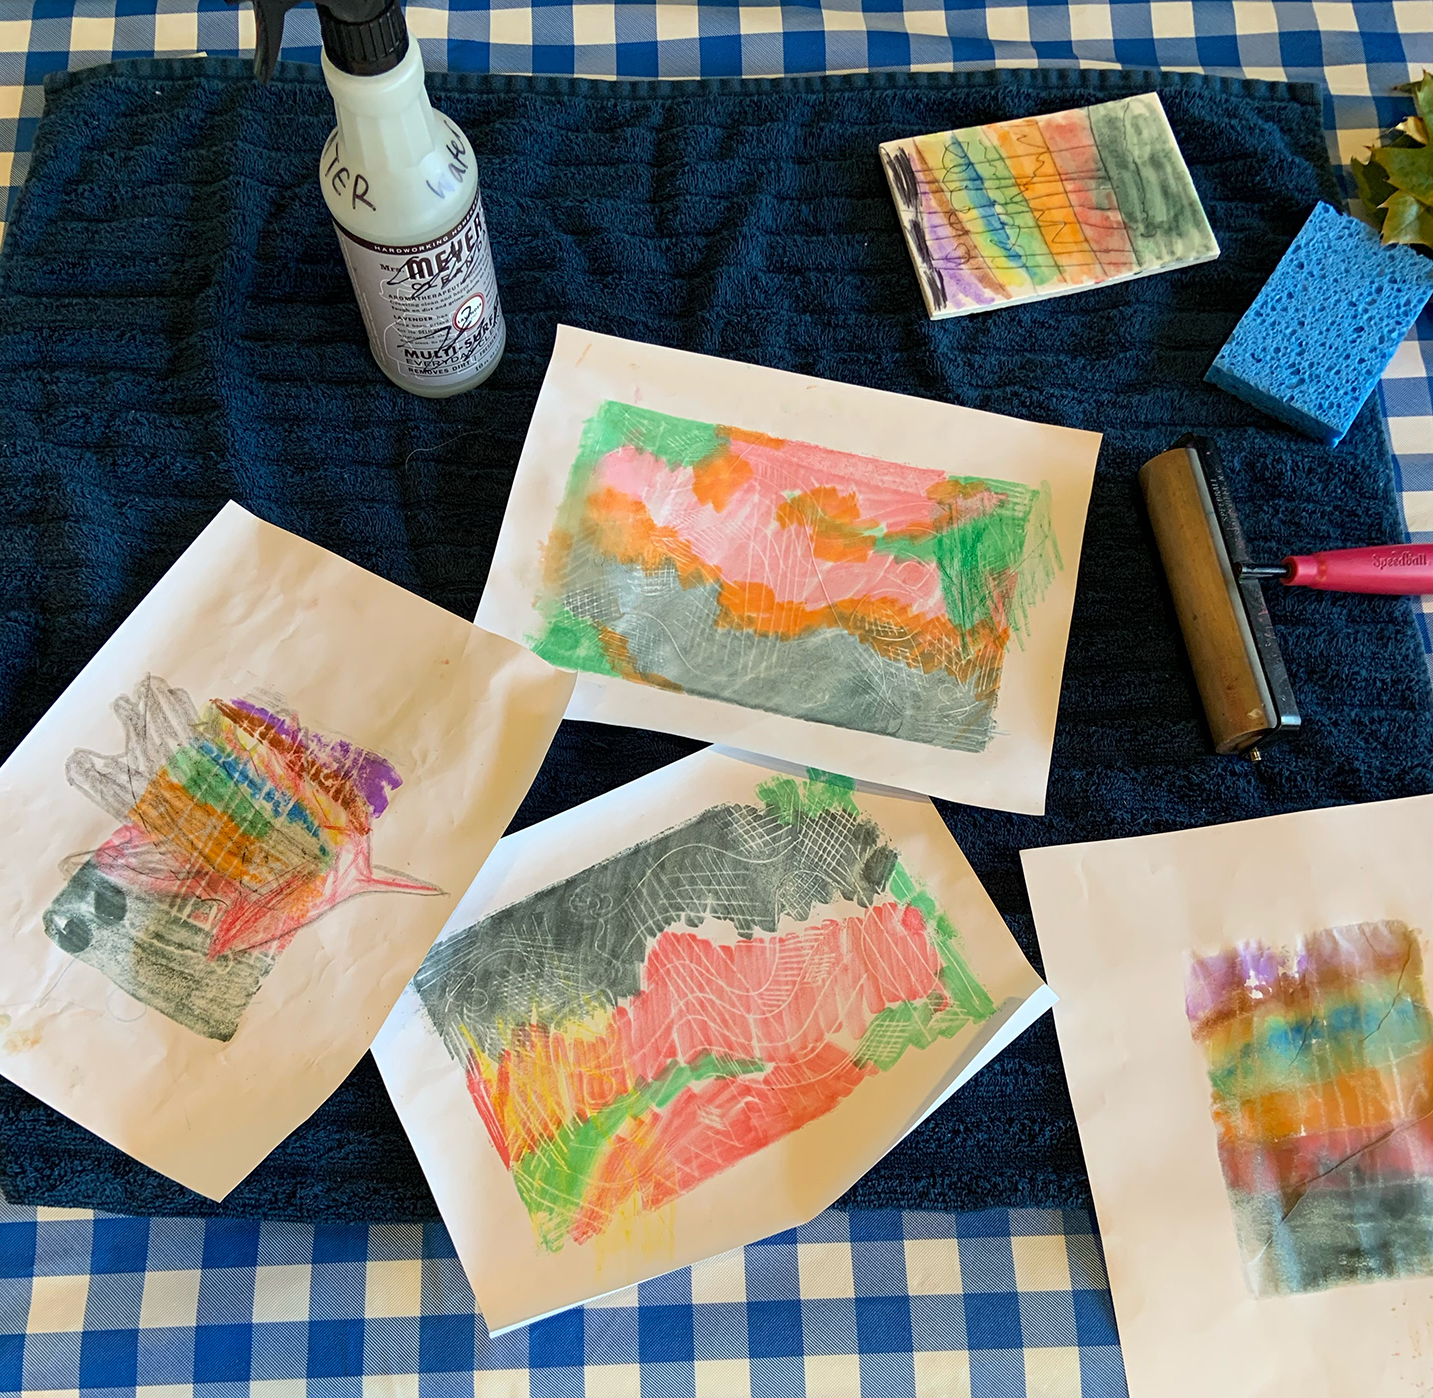 A photo of works of art made by children spread across a table. Various art-making tools and papers lay atop a blue gingham tablecloth. 